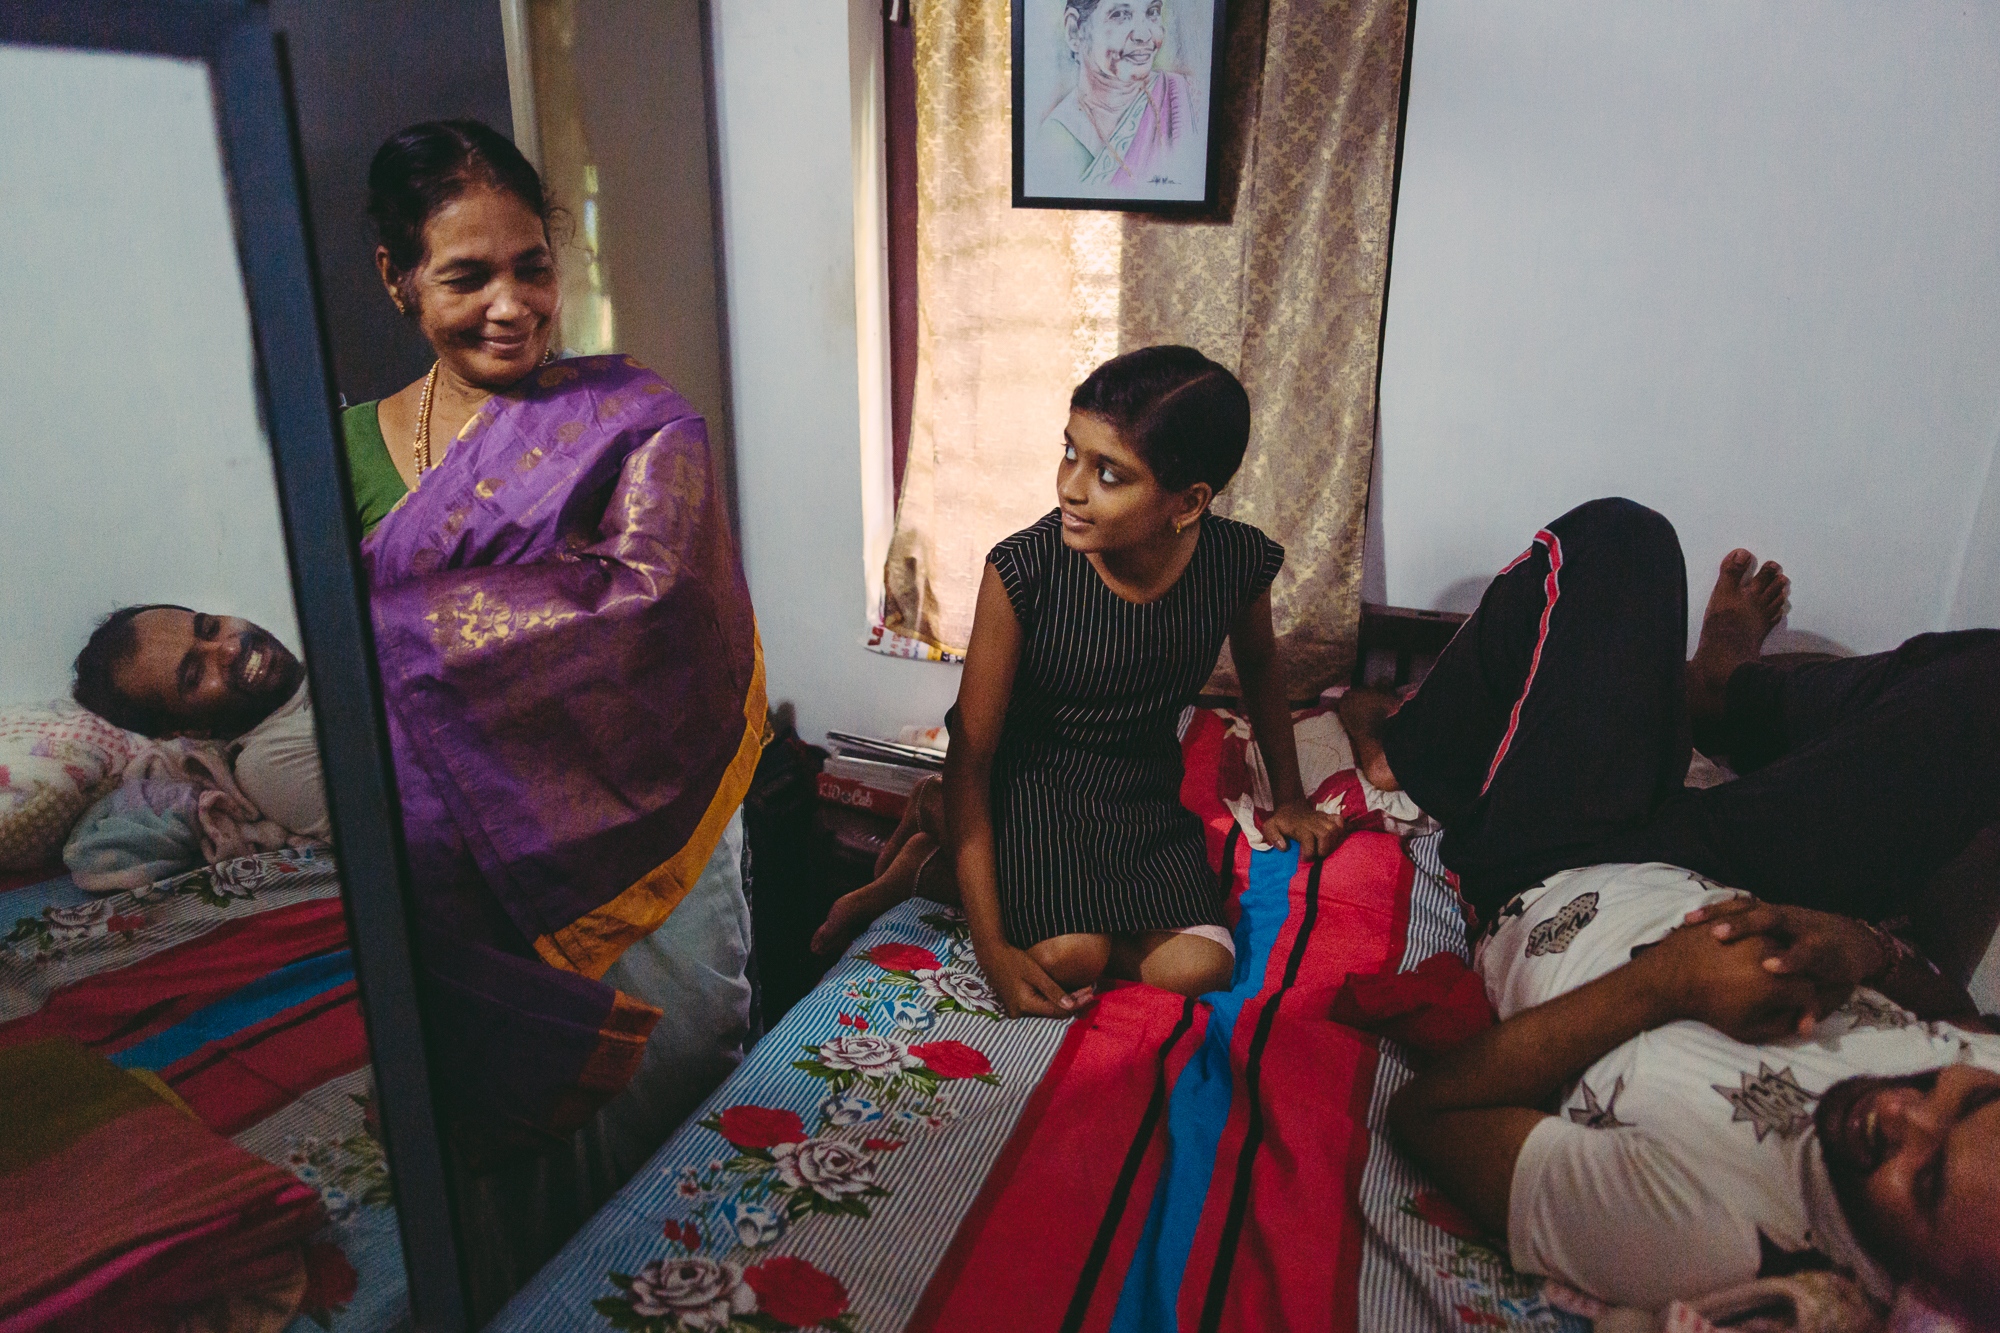  Vatakara, Kerala, INDIA - September 12, 2017: Meenakshi Raghavan &#39;Gurukkhal&#39; (L), 76, shows her Sari collection to her grand-children Lena (C), 14, and Jithin (R), 27. When Meenakshi was a young woman, she owned only four Saris and dreamt of owning a variety, she recalls. Nowadays, she has more Saris than she can count. She always wears a Sari, even when practising Kalaripayattu. 